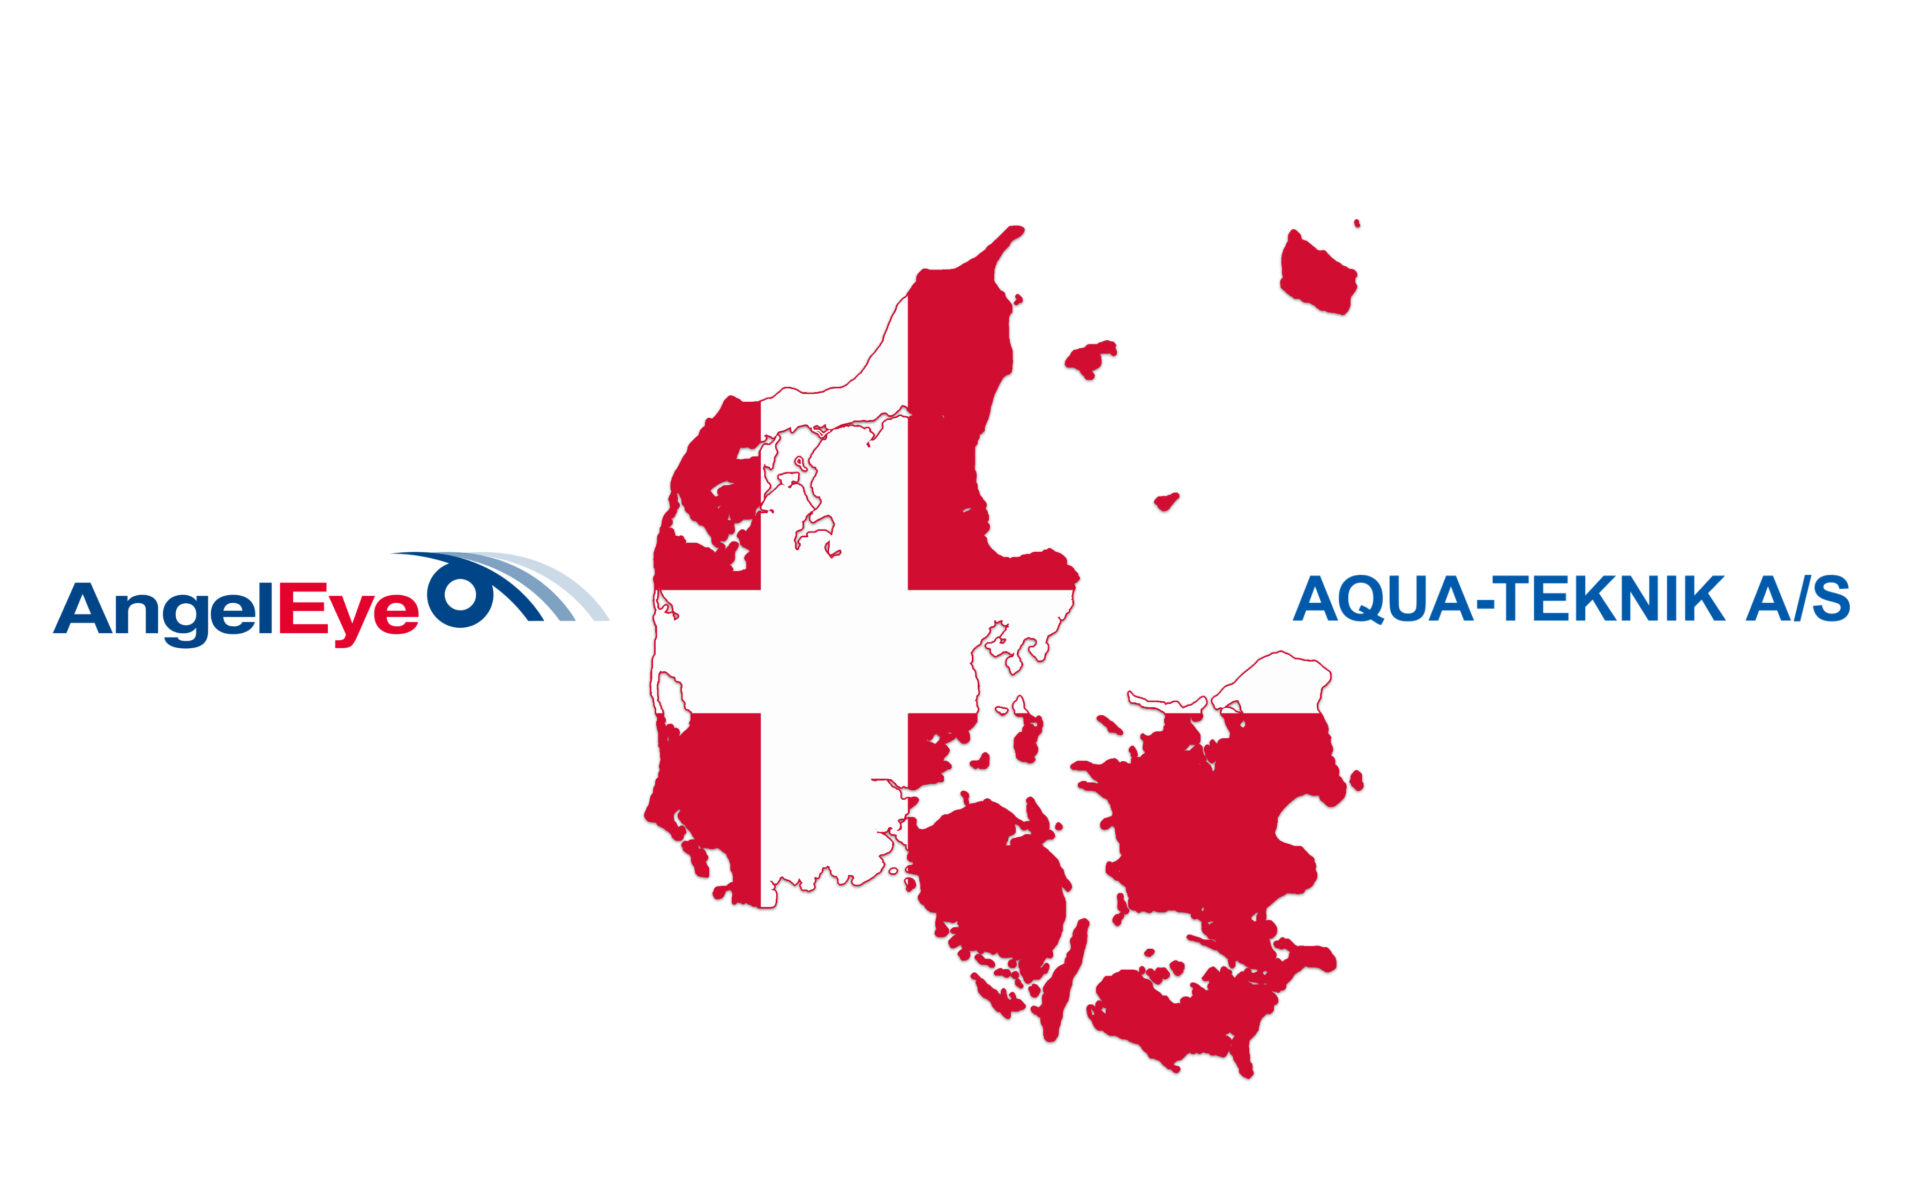 AngelEye expands its presence in Scandinavia with an exclusive partner in Denmark￼ Aqua Teknik Image scaled